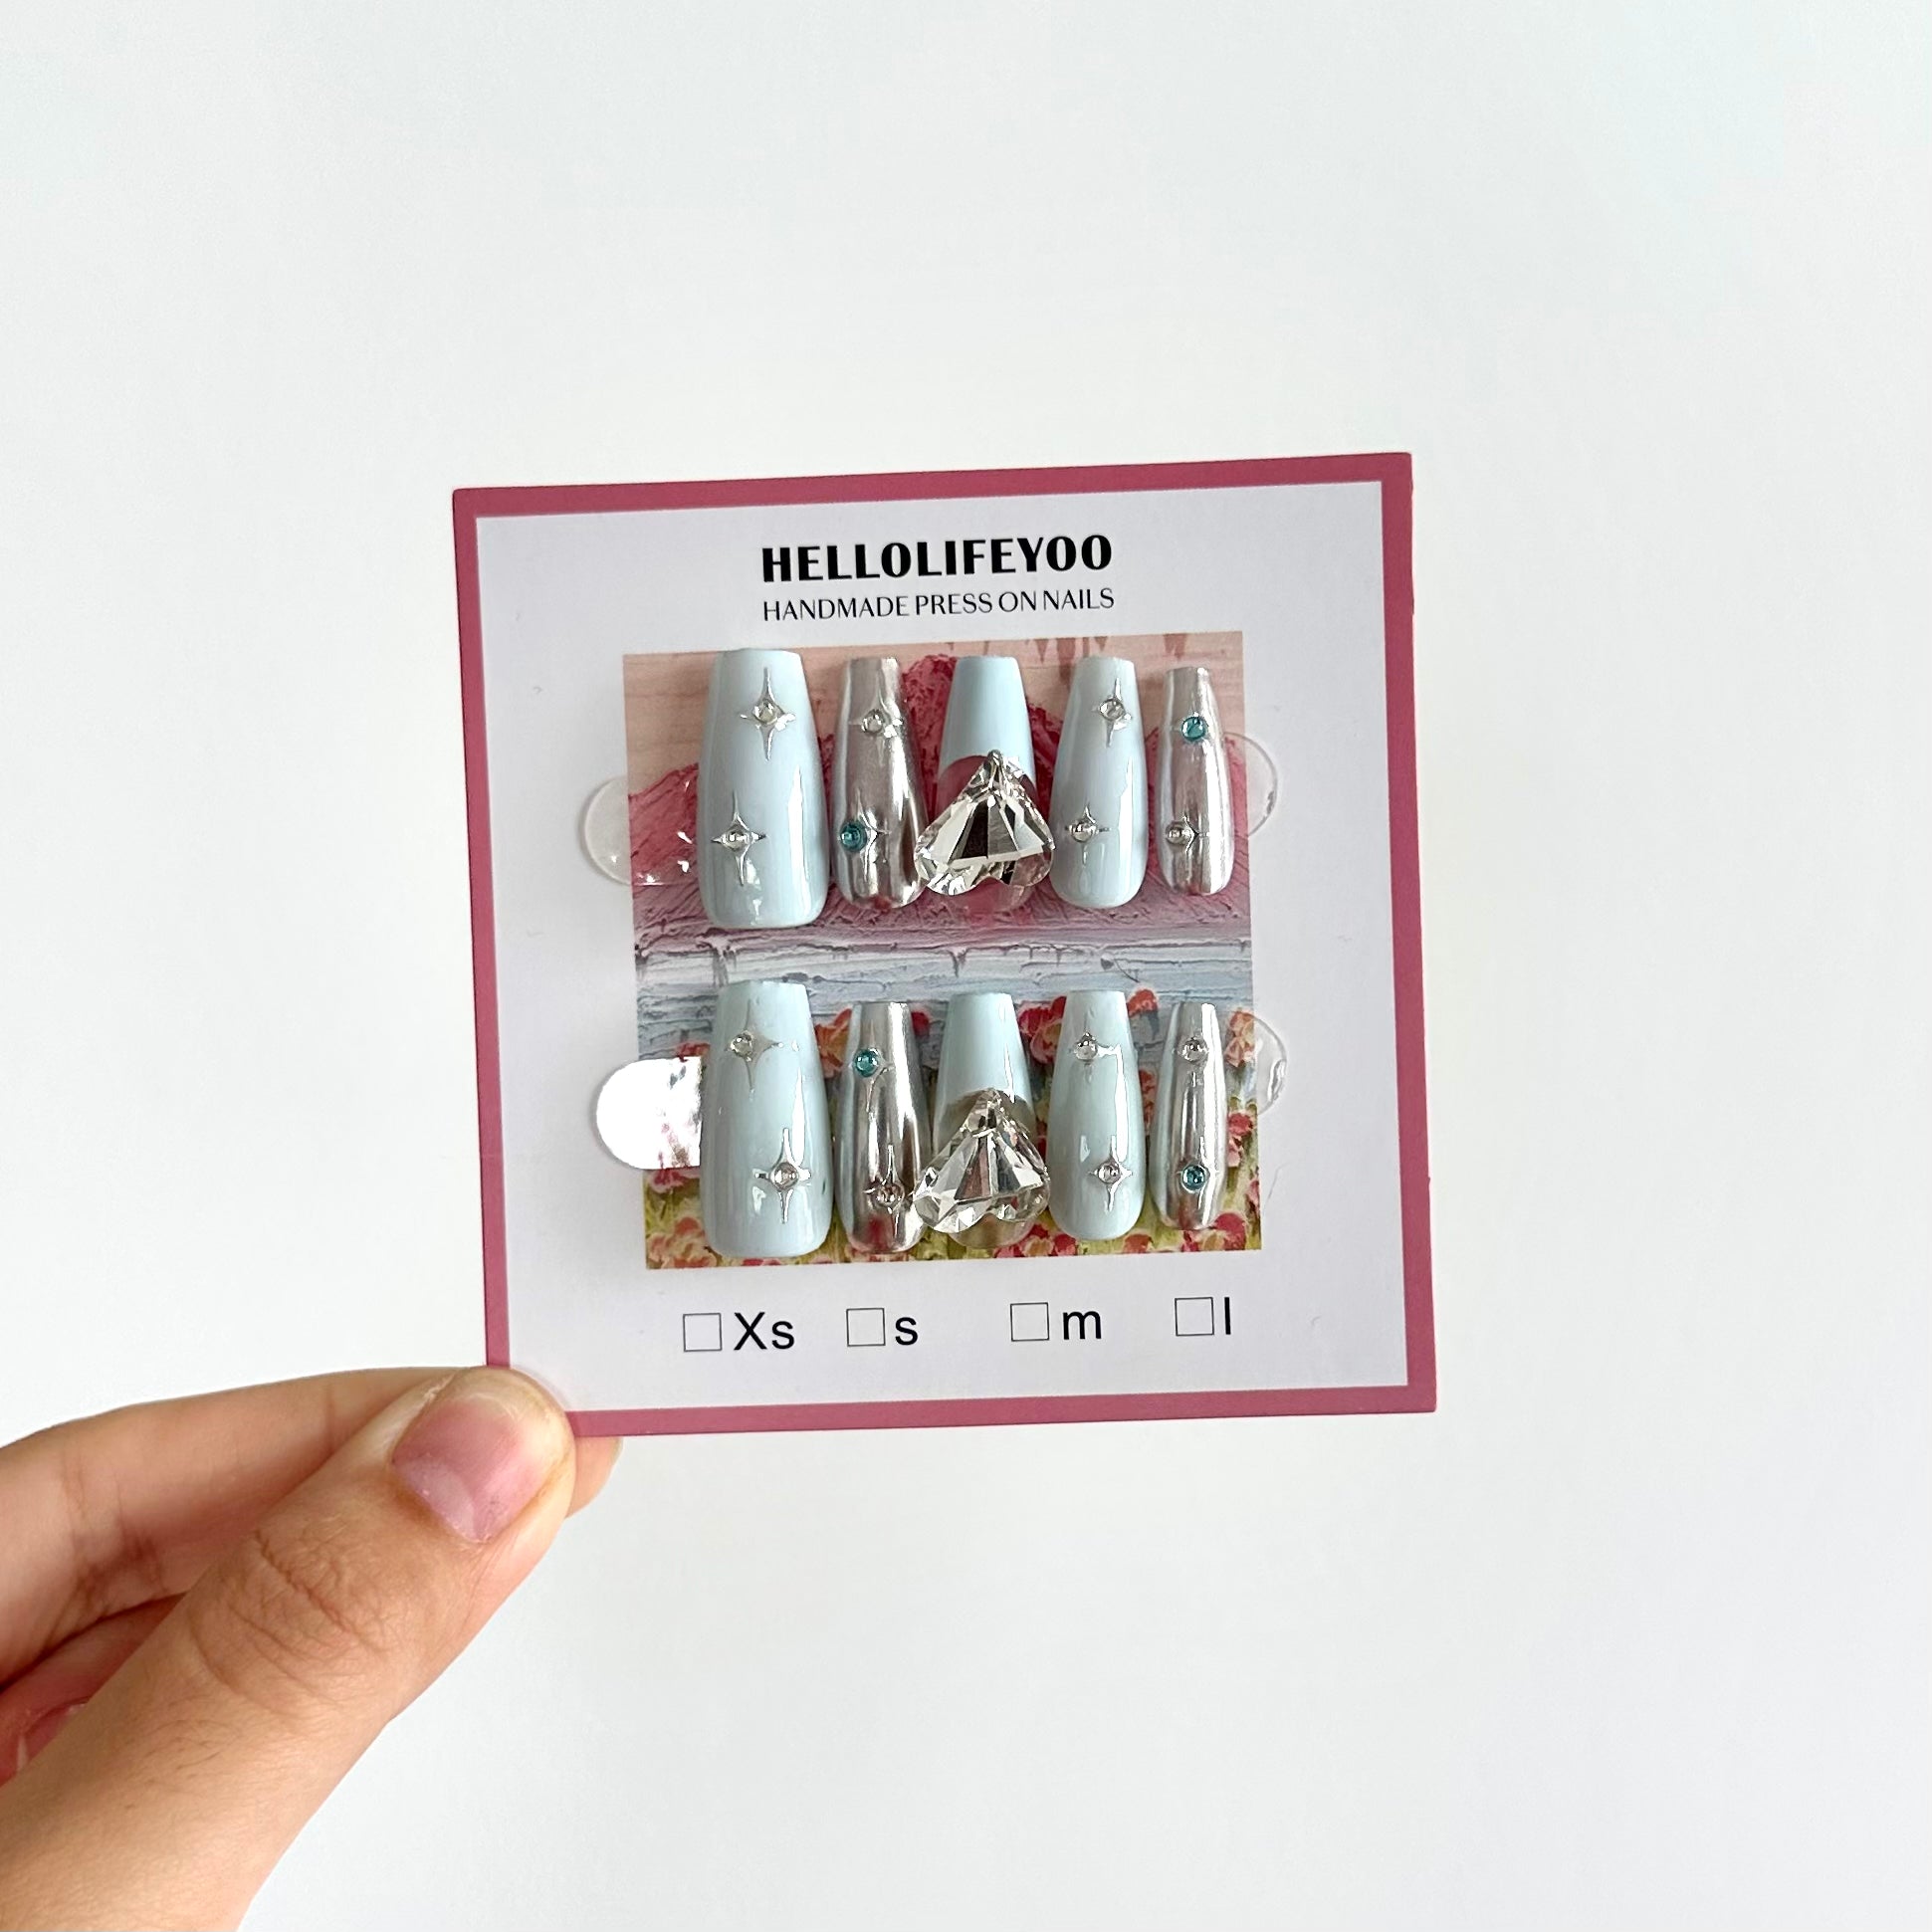 SEA SALT STARBURST - TEN PIECES OF HANDCRAFTED PRESS ON NAIL